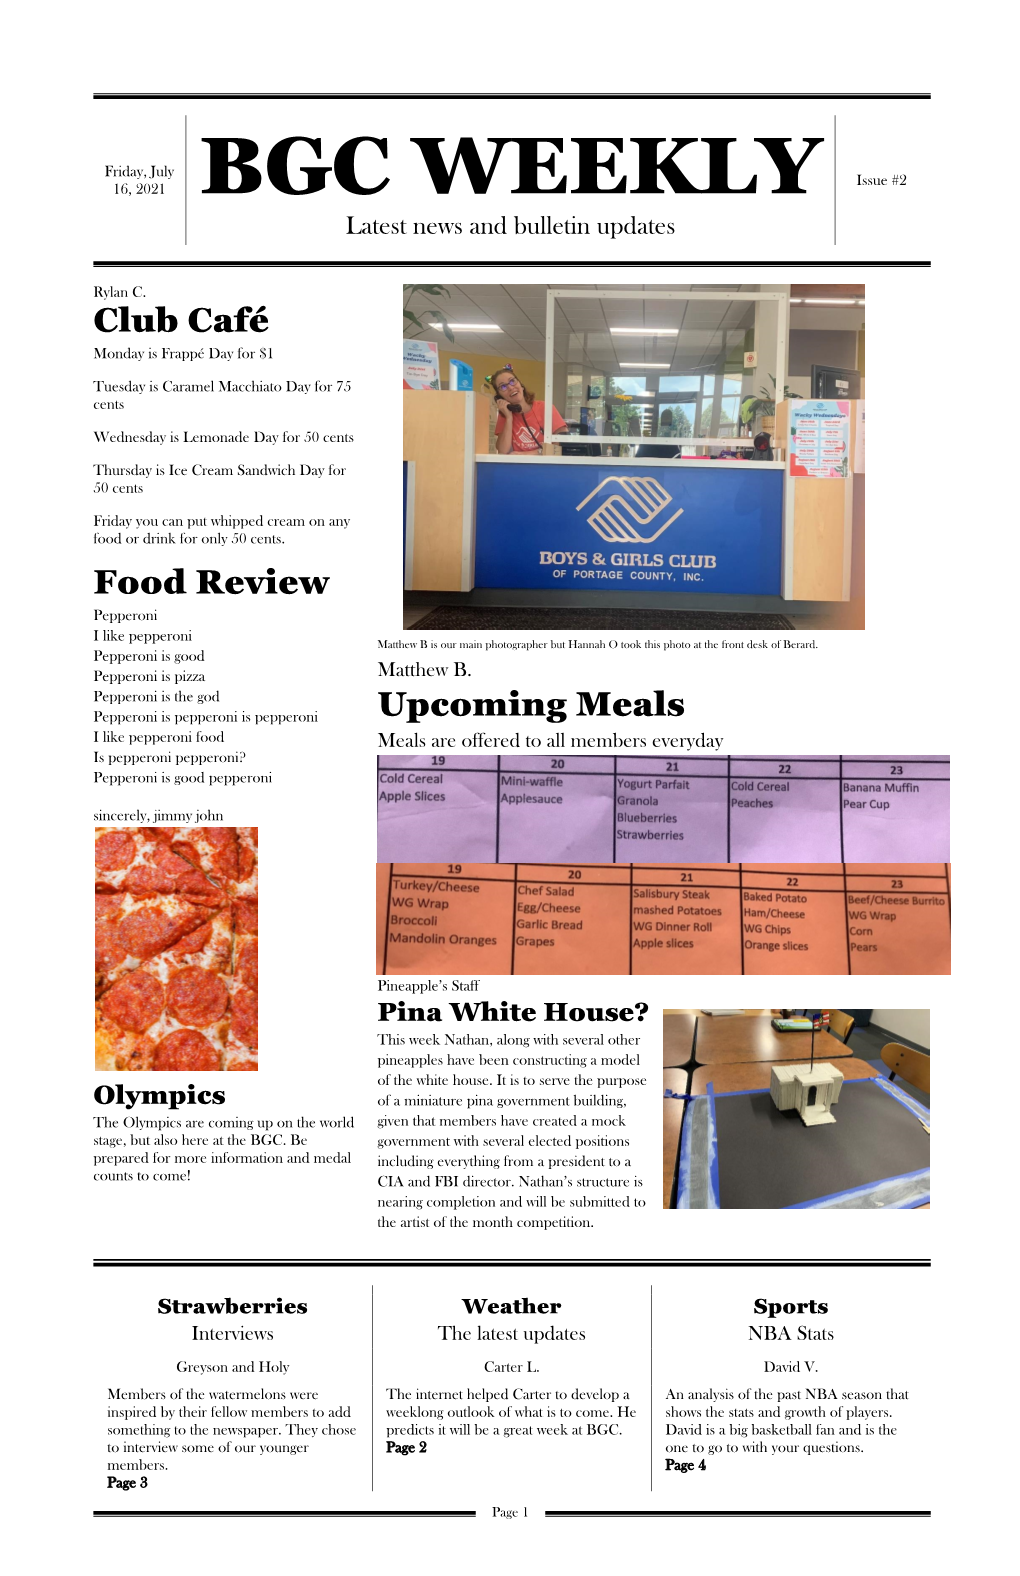 BGC WEEKLY Latest News and Bulletin Updates